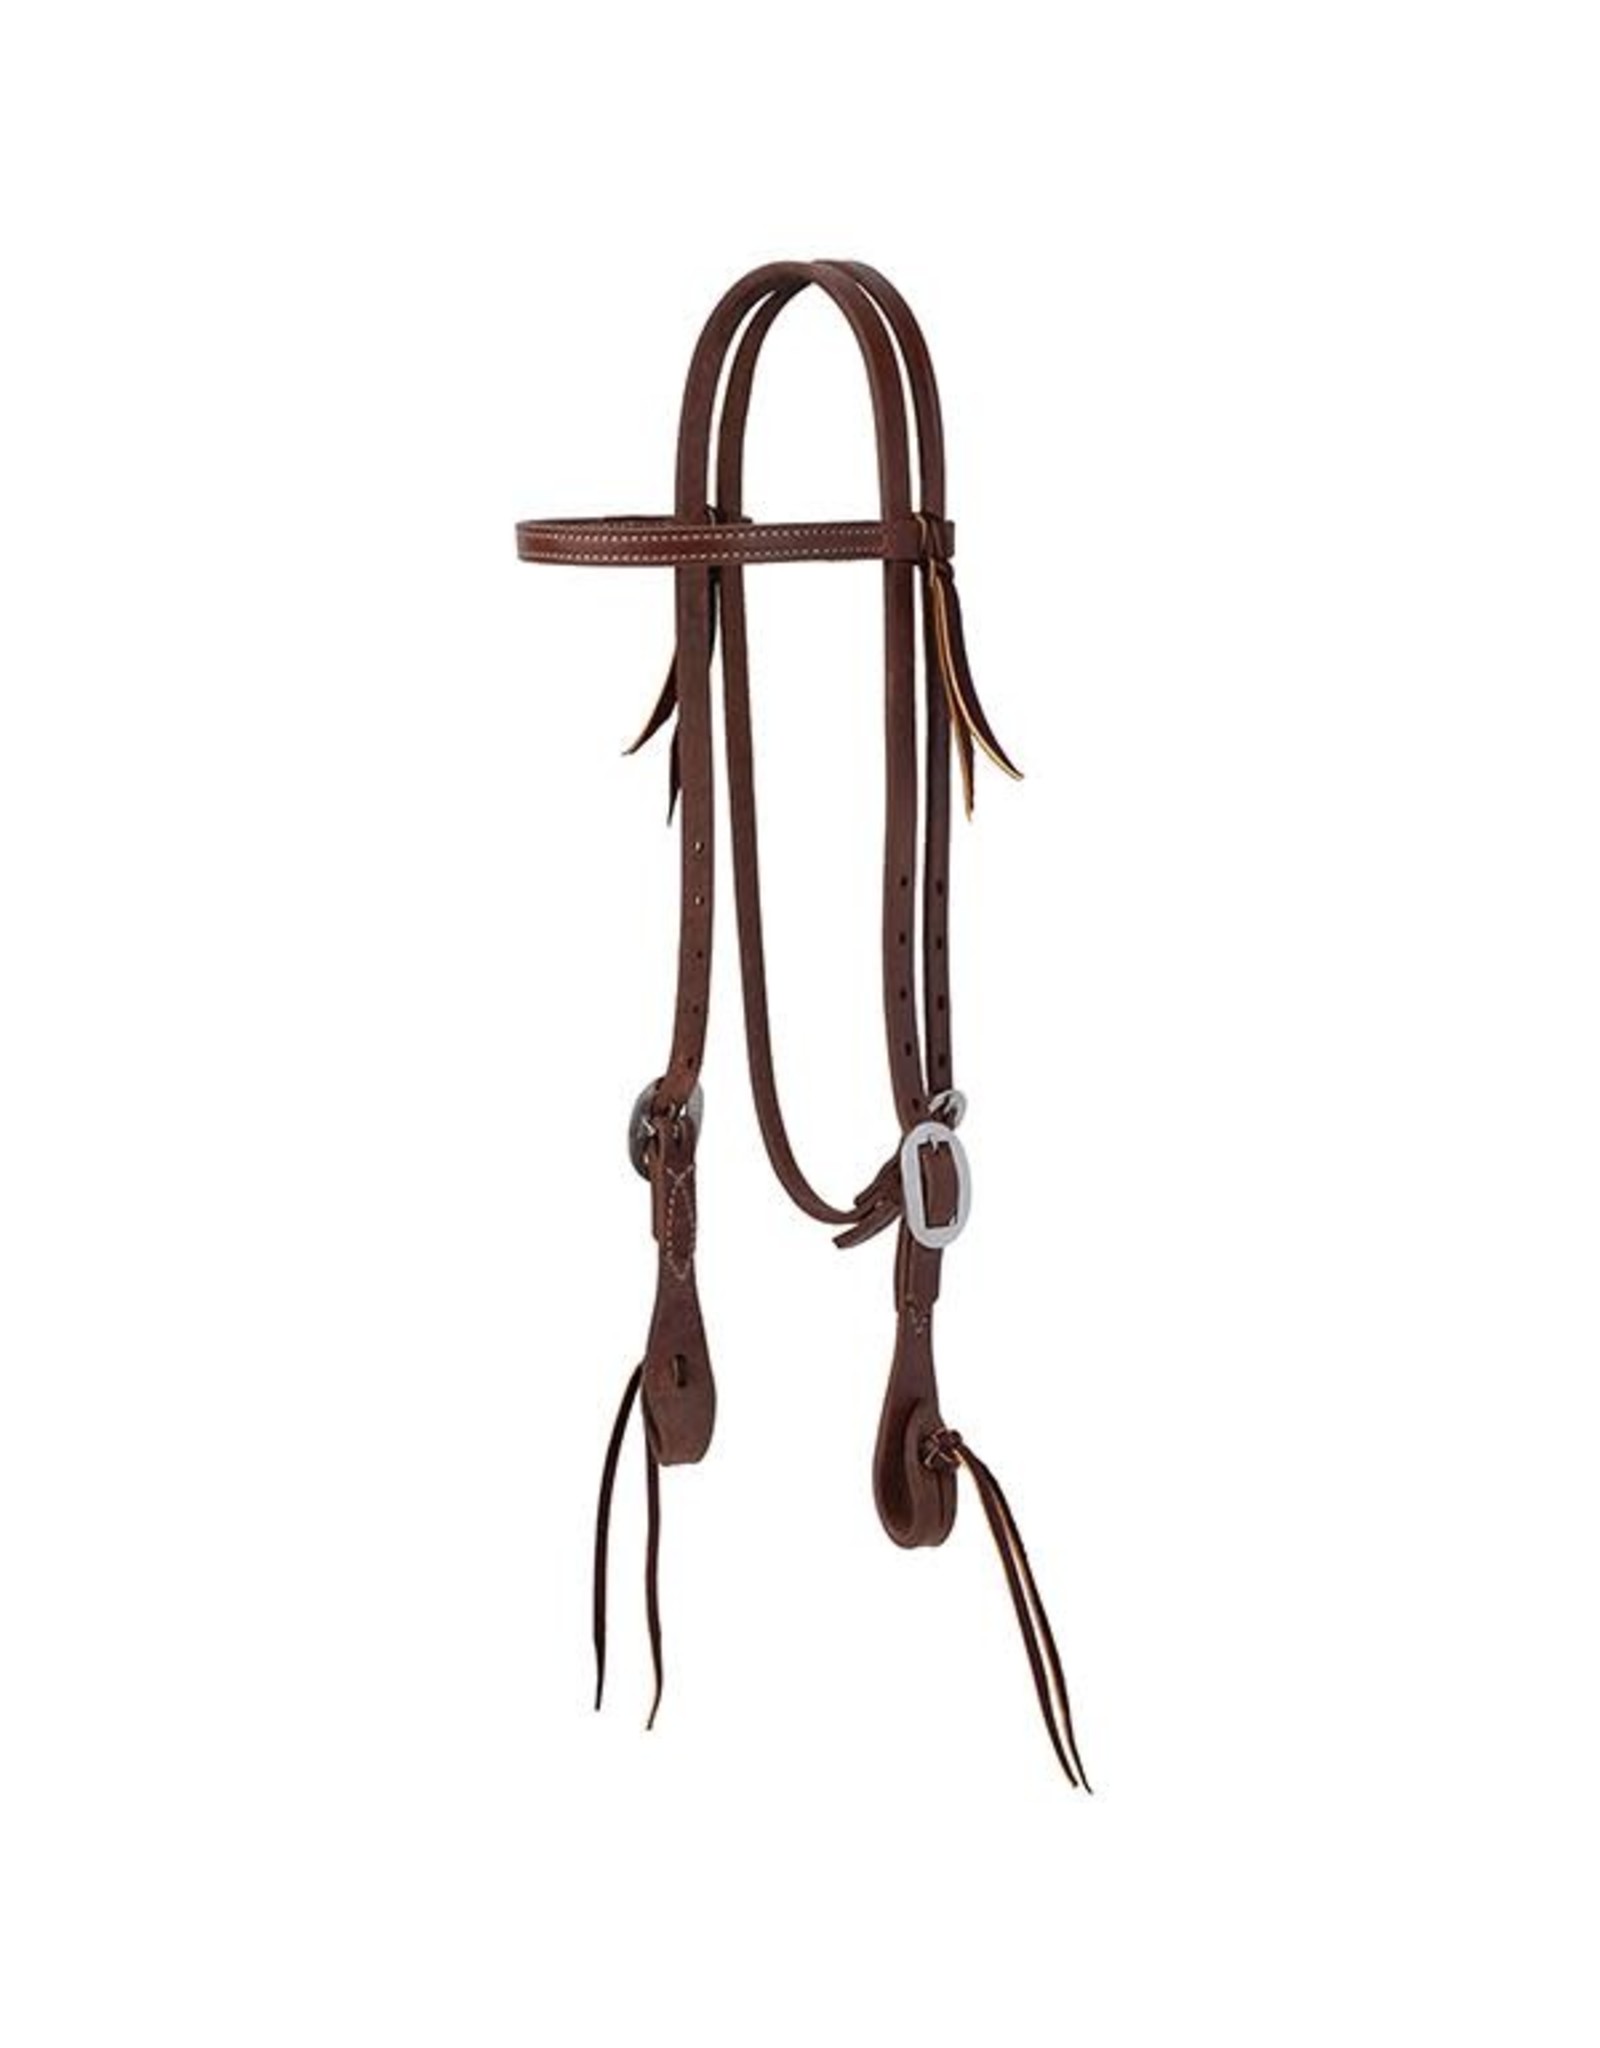 Pro Tack Oiled Pineapple Knot Browband Headstall